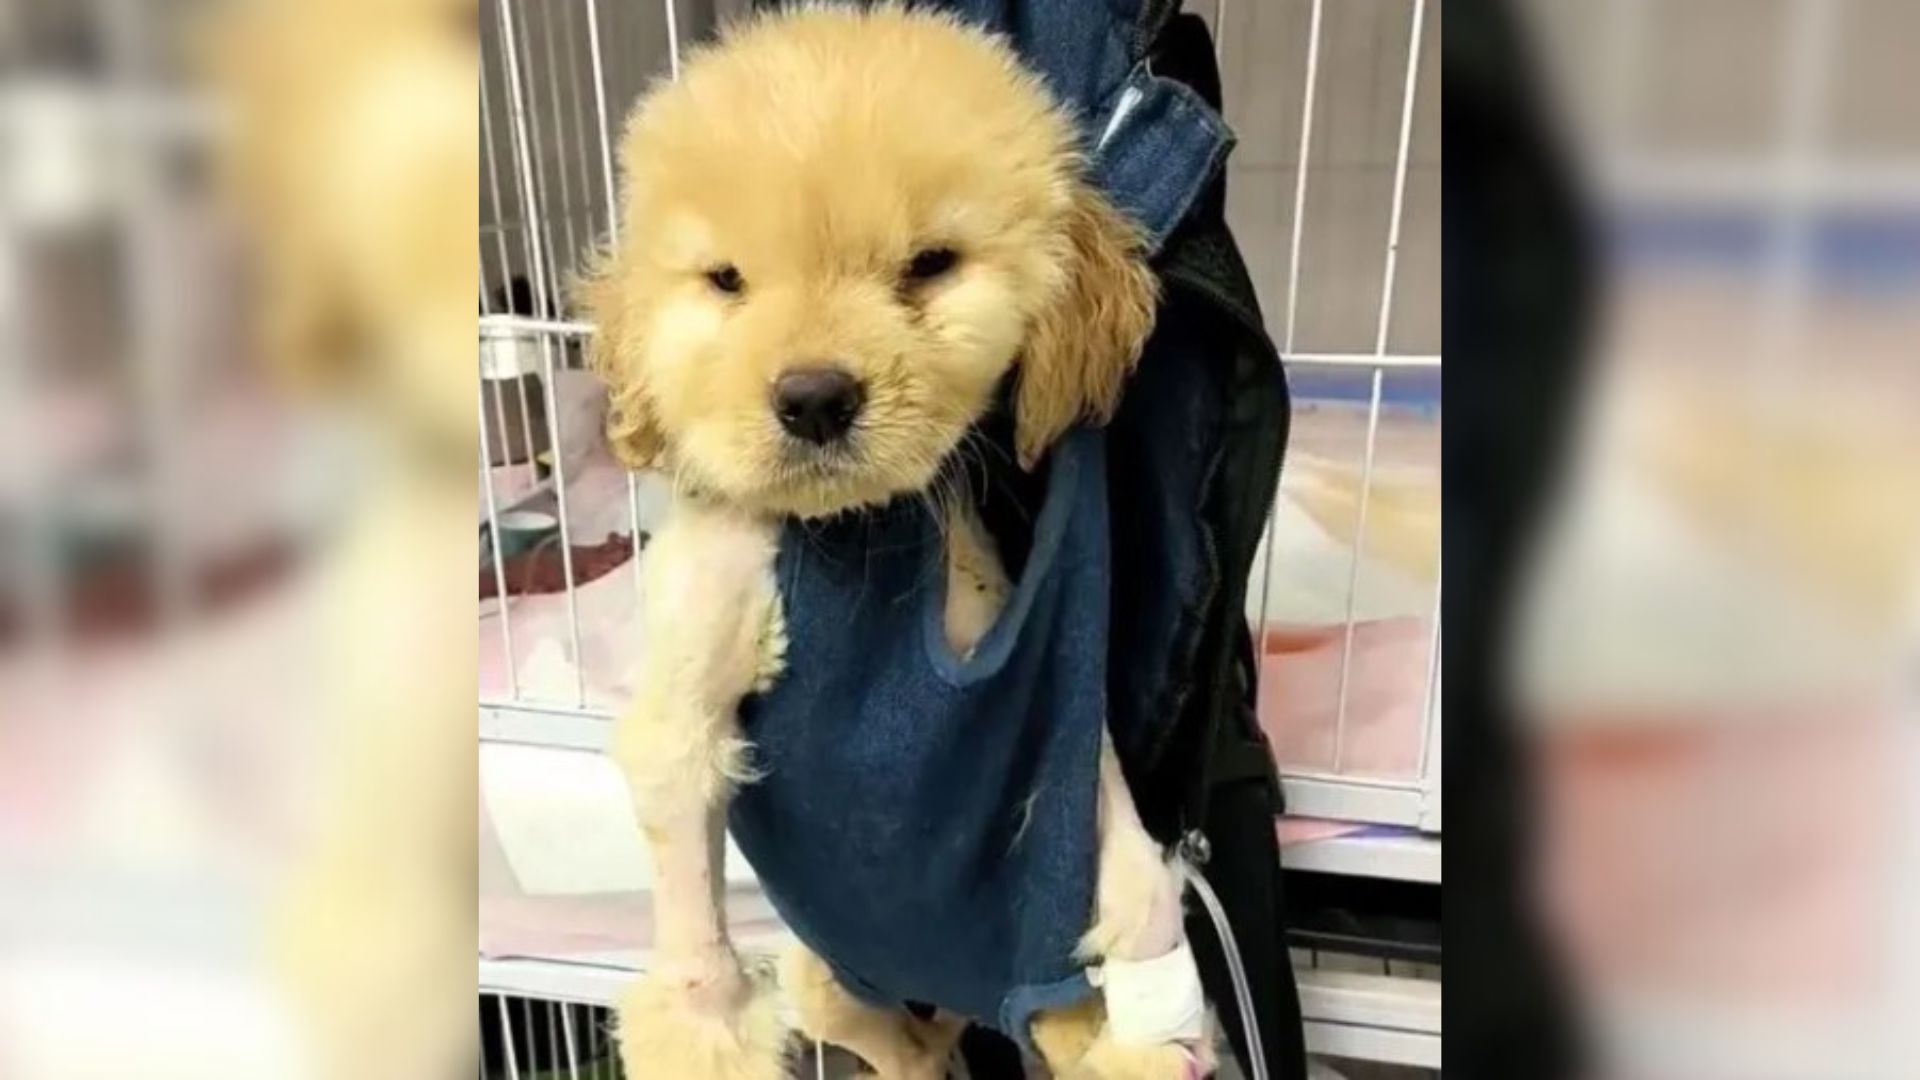 Paralyzed puppy at the vet